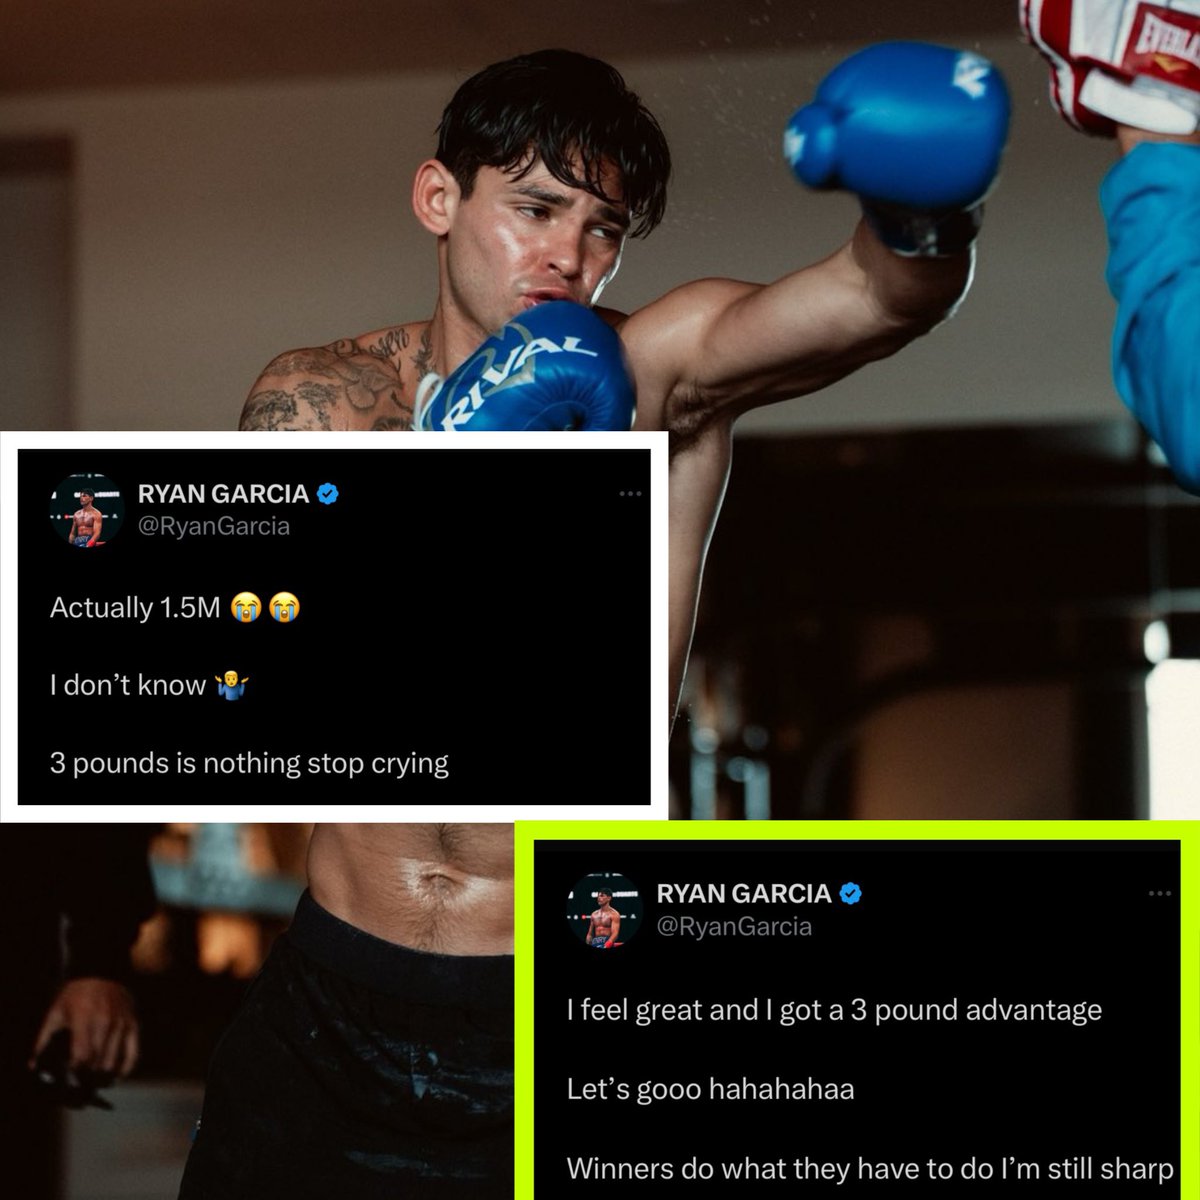 Top post gets deleted for the second post in the space of seconds 🤦🏻‍♂️

#fightclub247 #boxing #fighter #garciahaney #ryangarcia #devinhaney #champion #forthefans